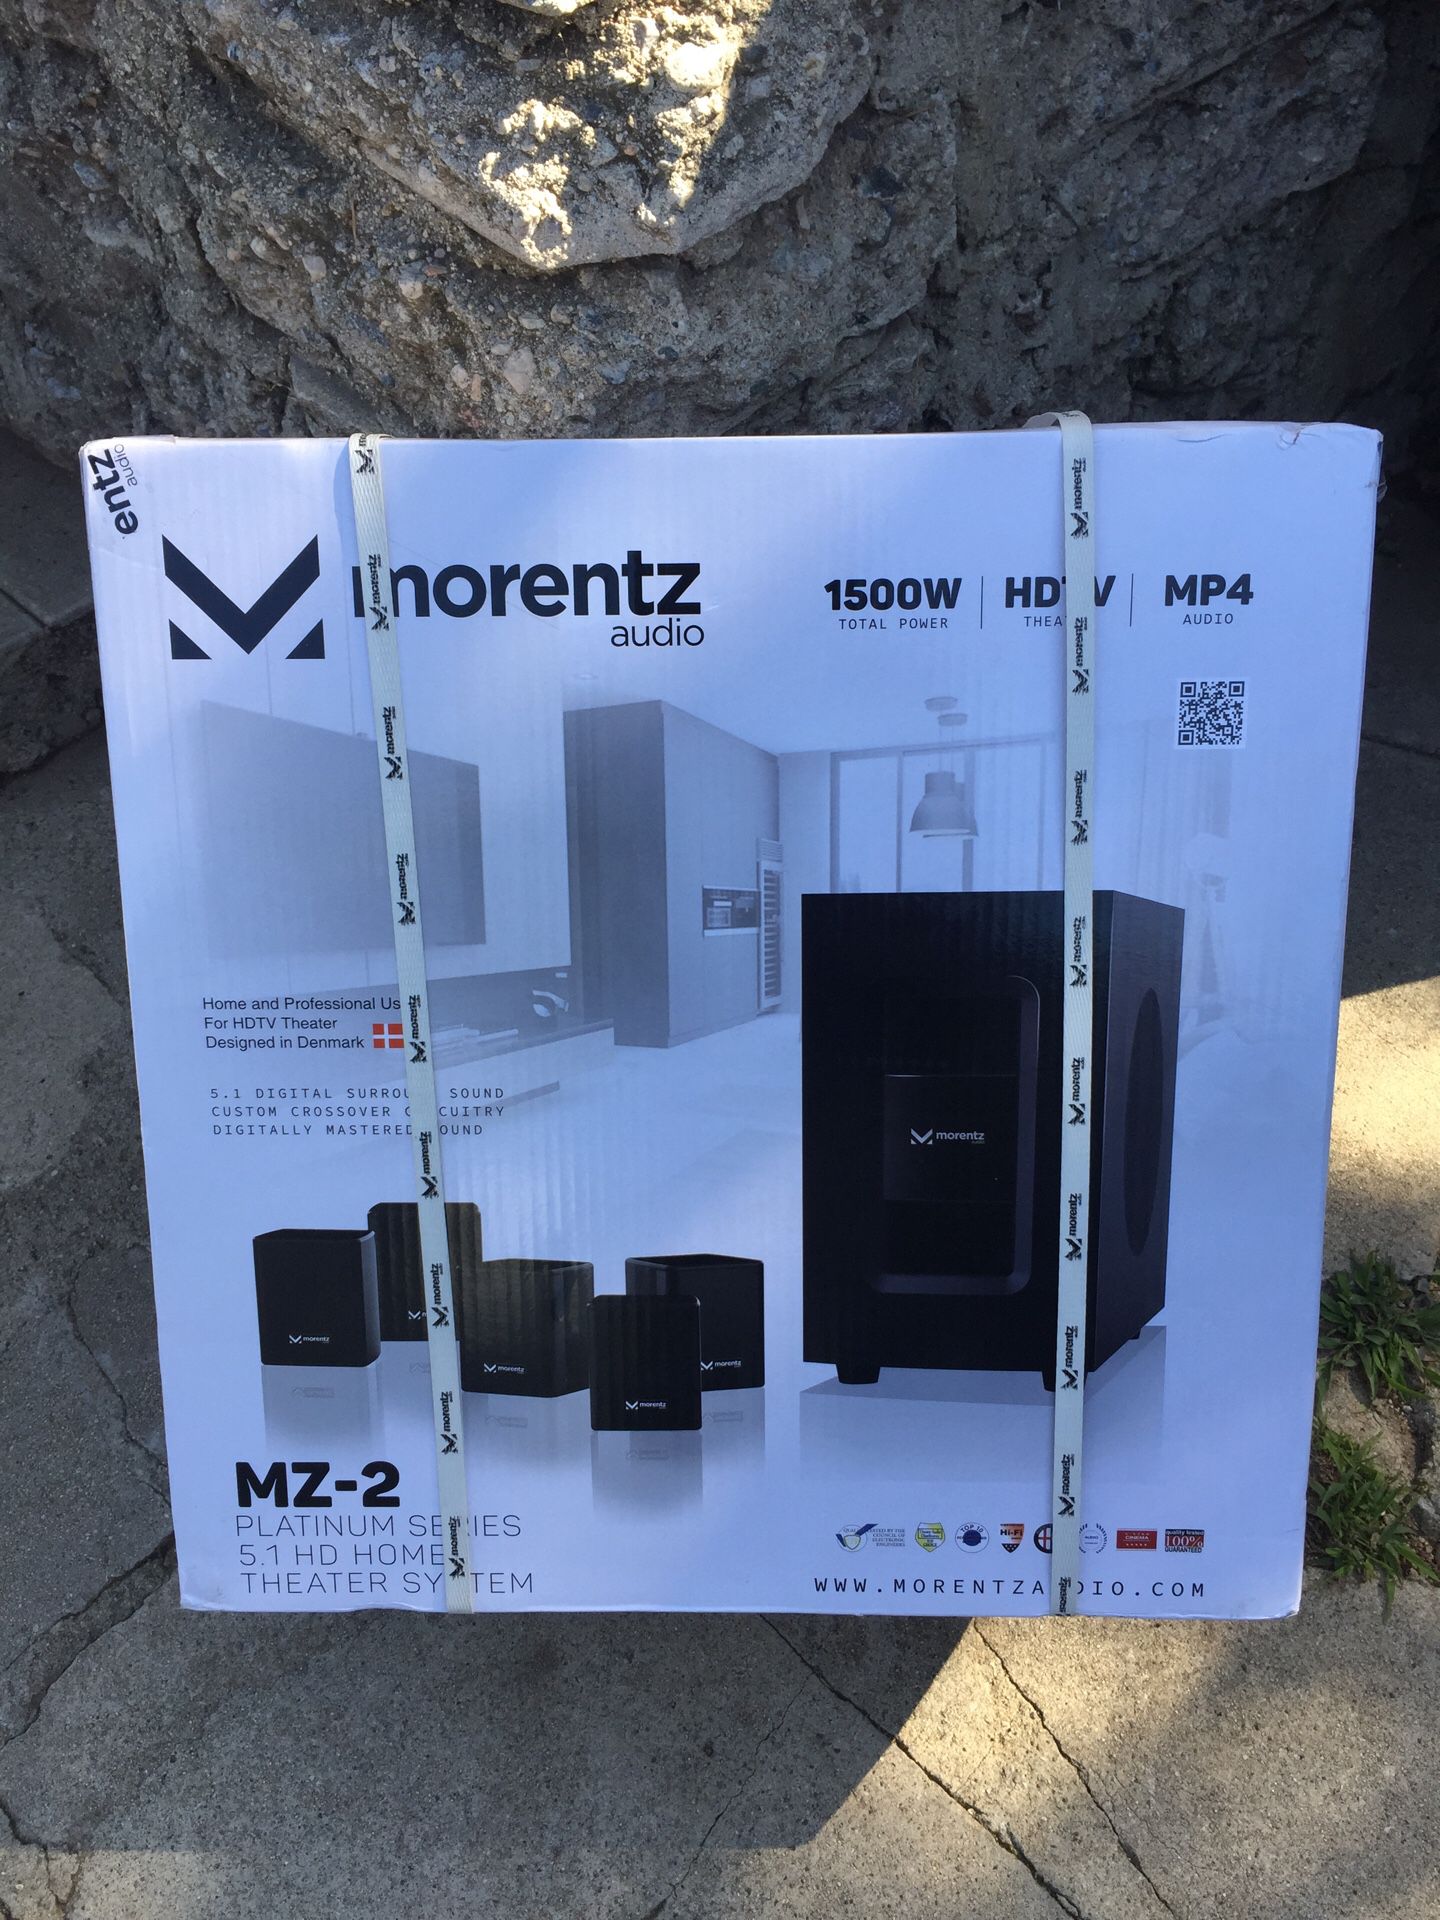 New/Unopened Morentz home theater and professional studio quality HDTV System $1900